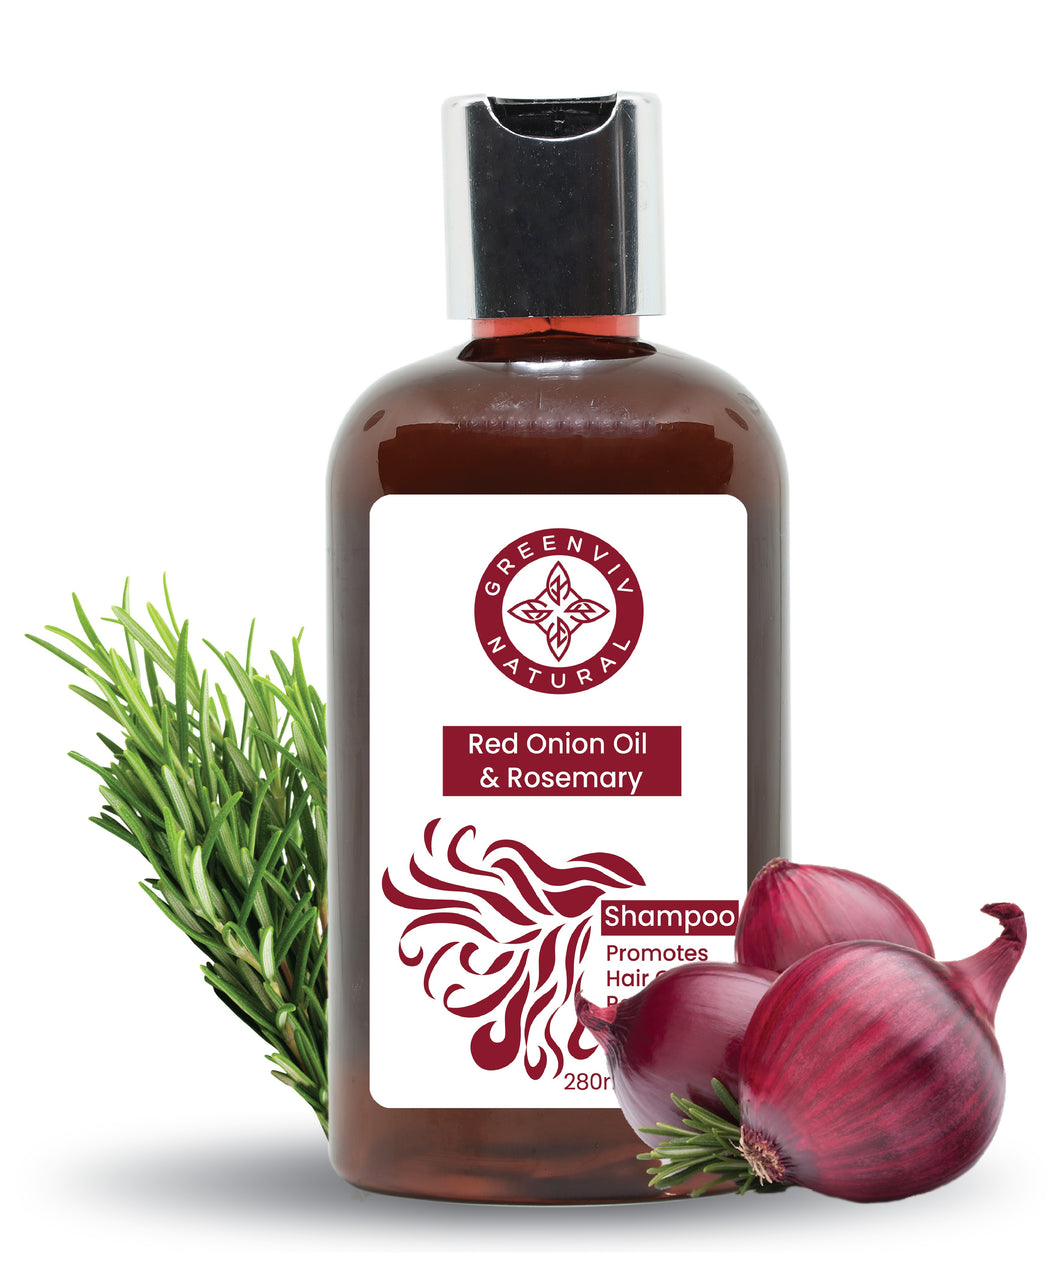 Red Onion Oil & Rosemary